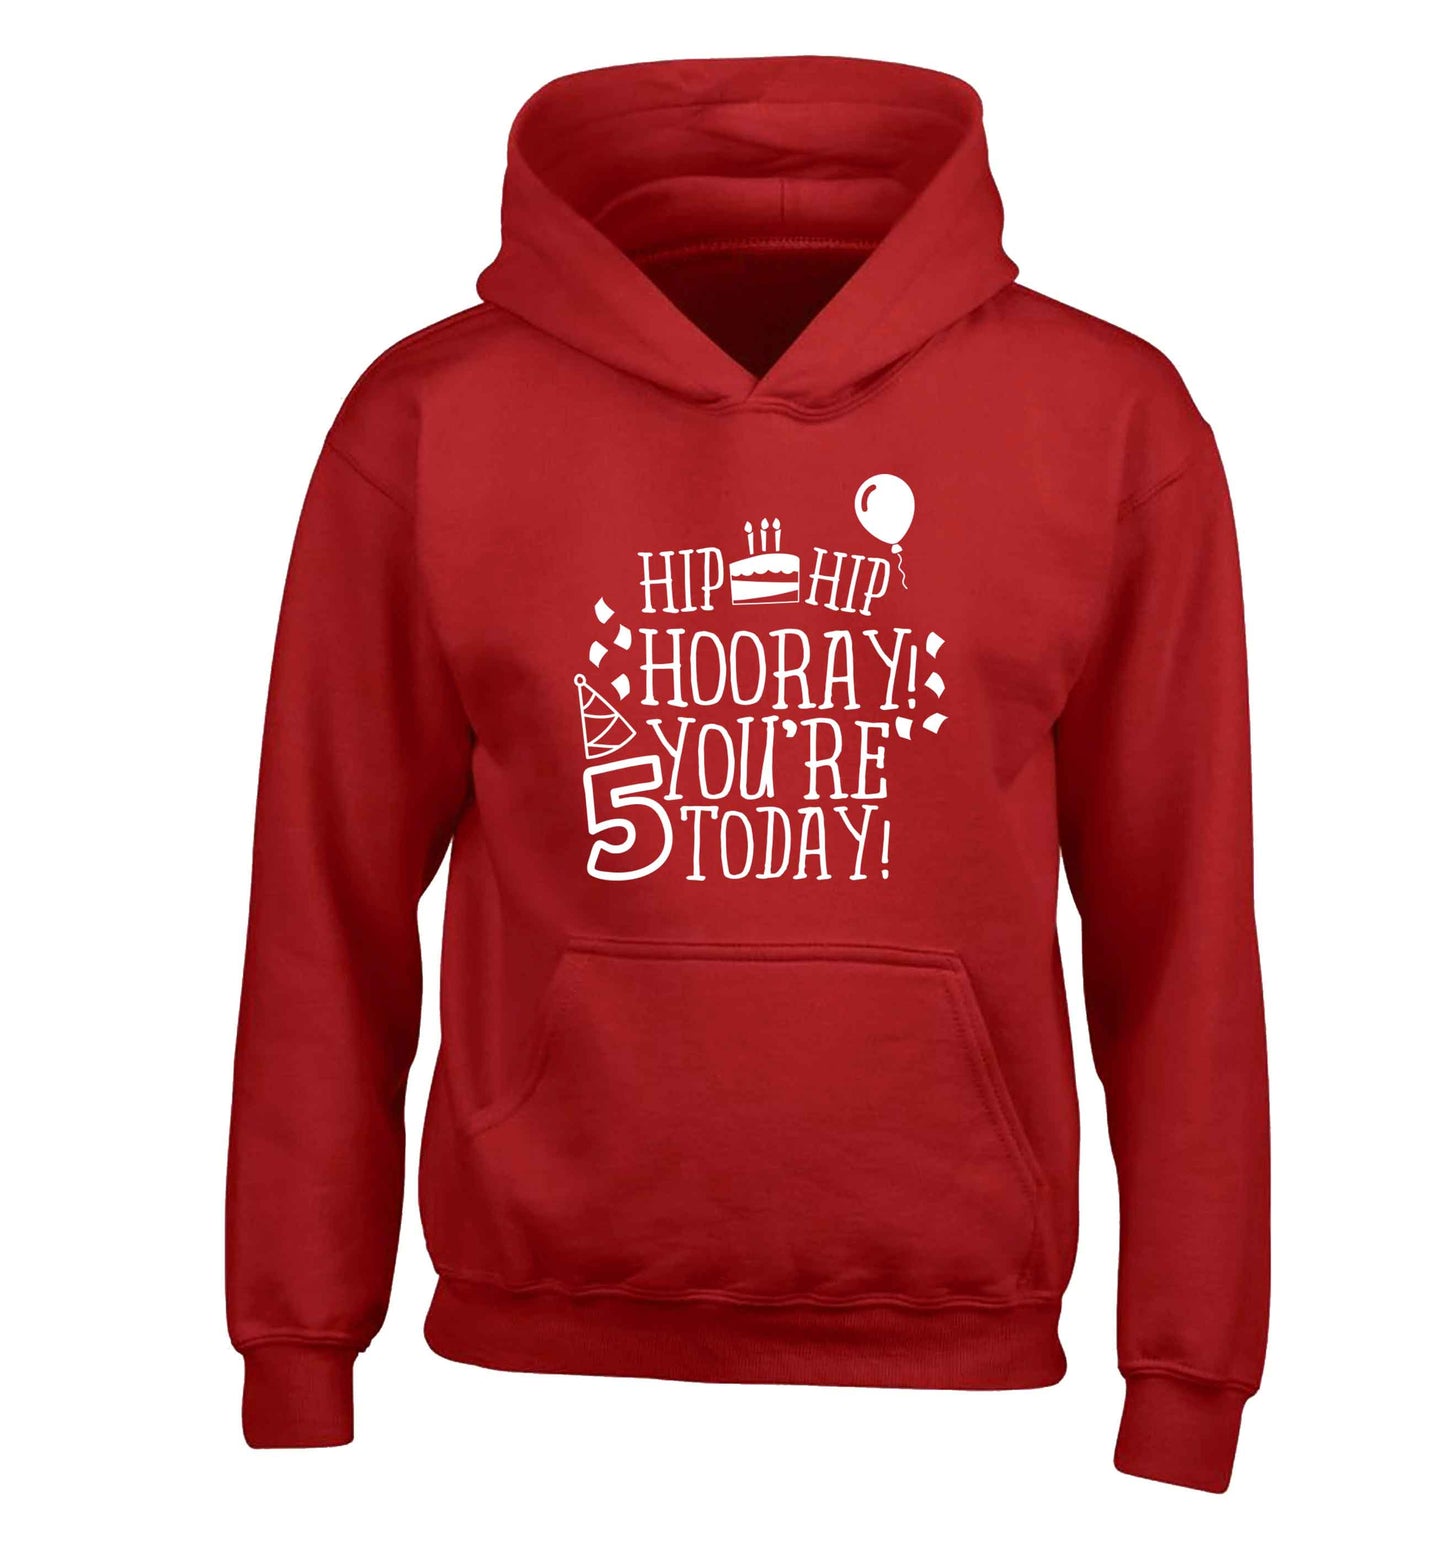 Hip hip hooray you're five today! children's red hoodie 12-13 Years